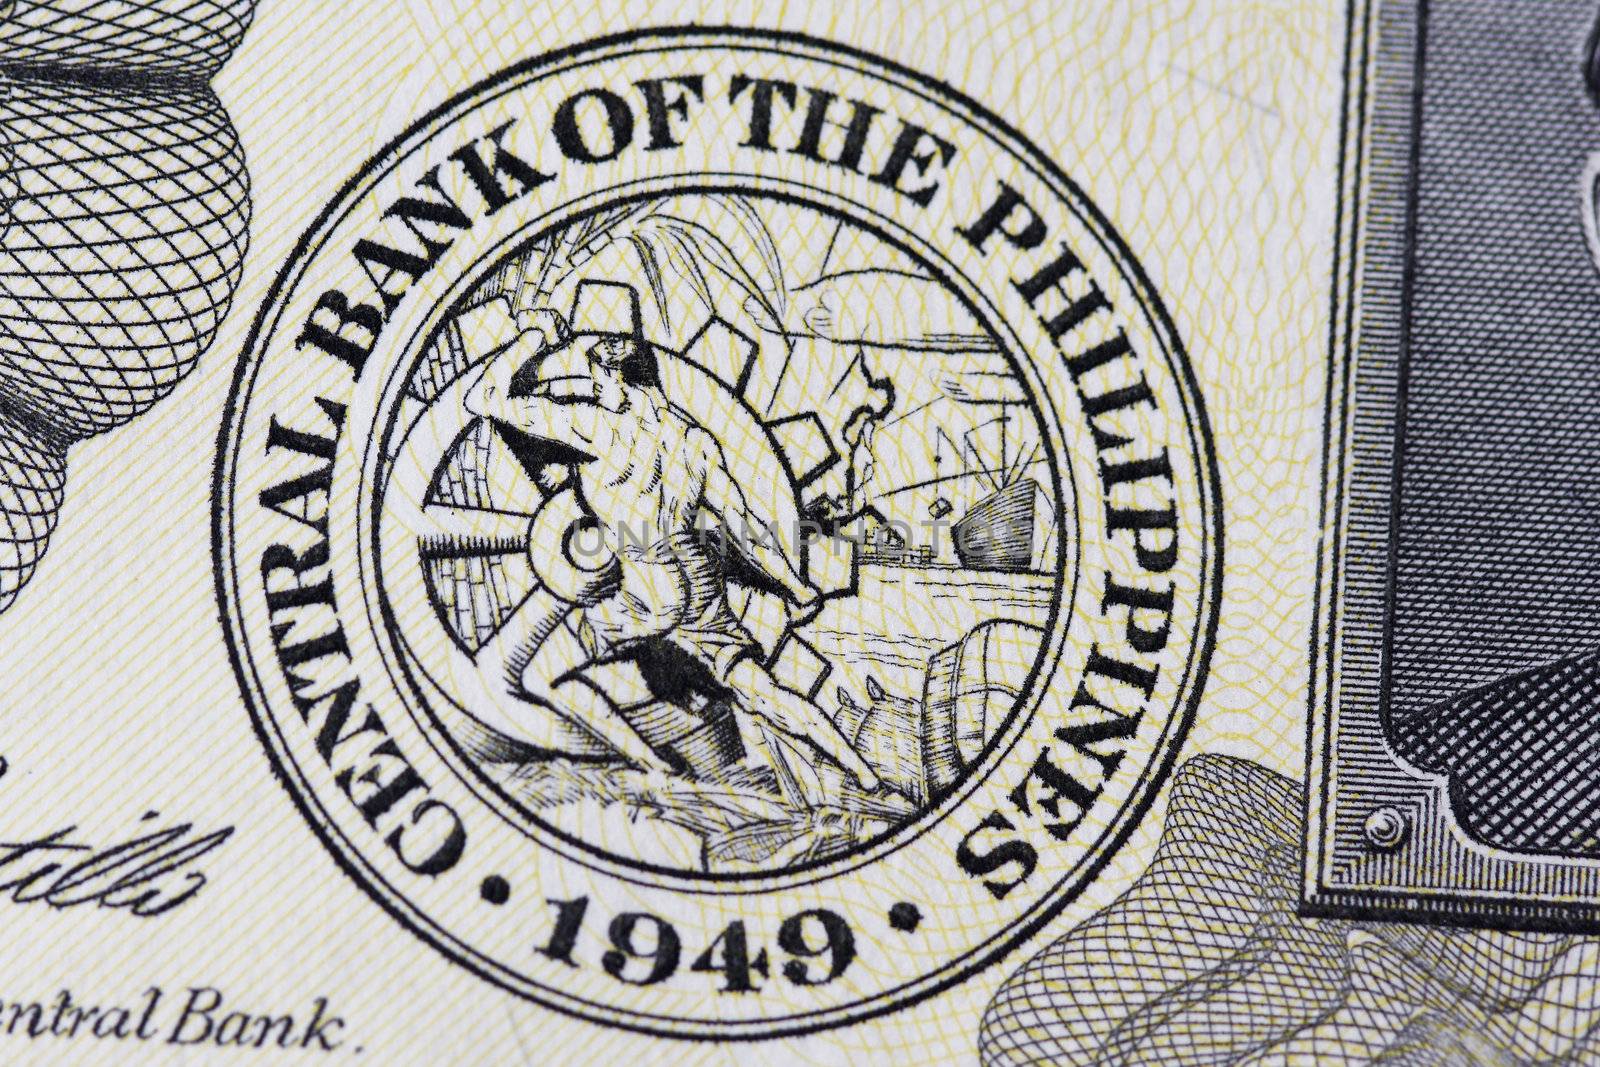 Central Bank Seal of the Philippines in Twenty Peso